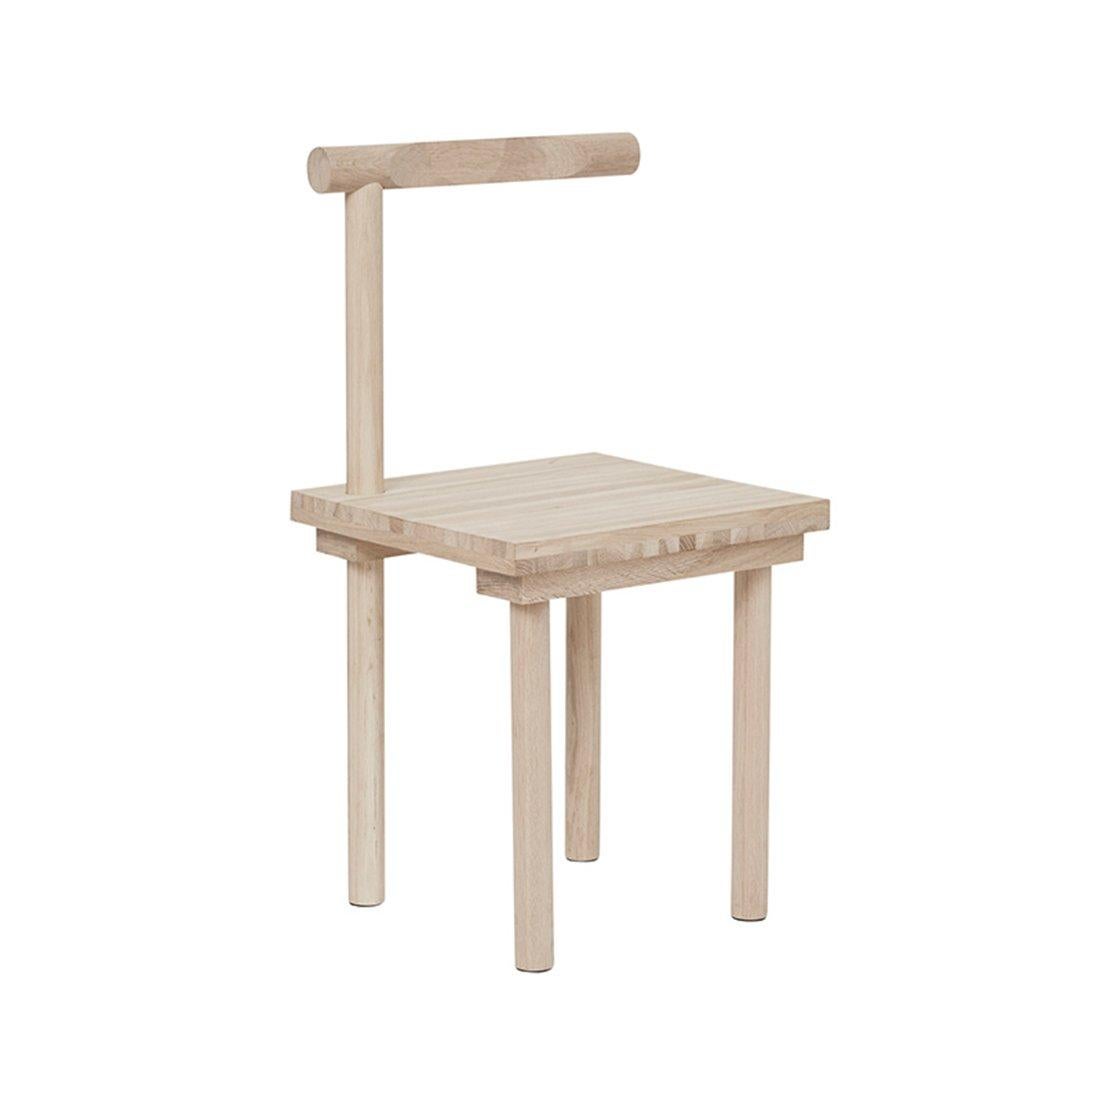 Sculptural chair by Kristina Dam Studio.
Materials: Solid oak with oil treatment.
Dimensions: 42 x 42 x H 80cm.

This piece of furniture is as functional as it’s creative – the Sculptural Chair. Bring a piece of architectural art to your dining